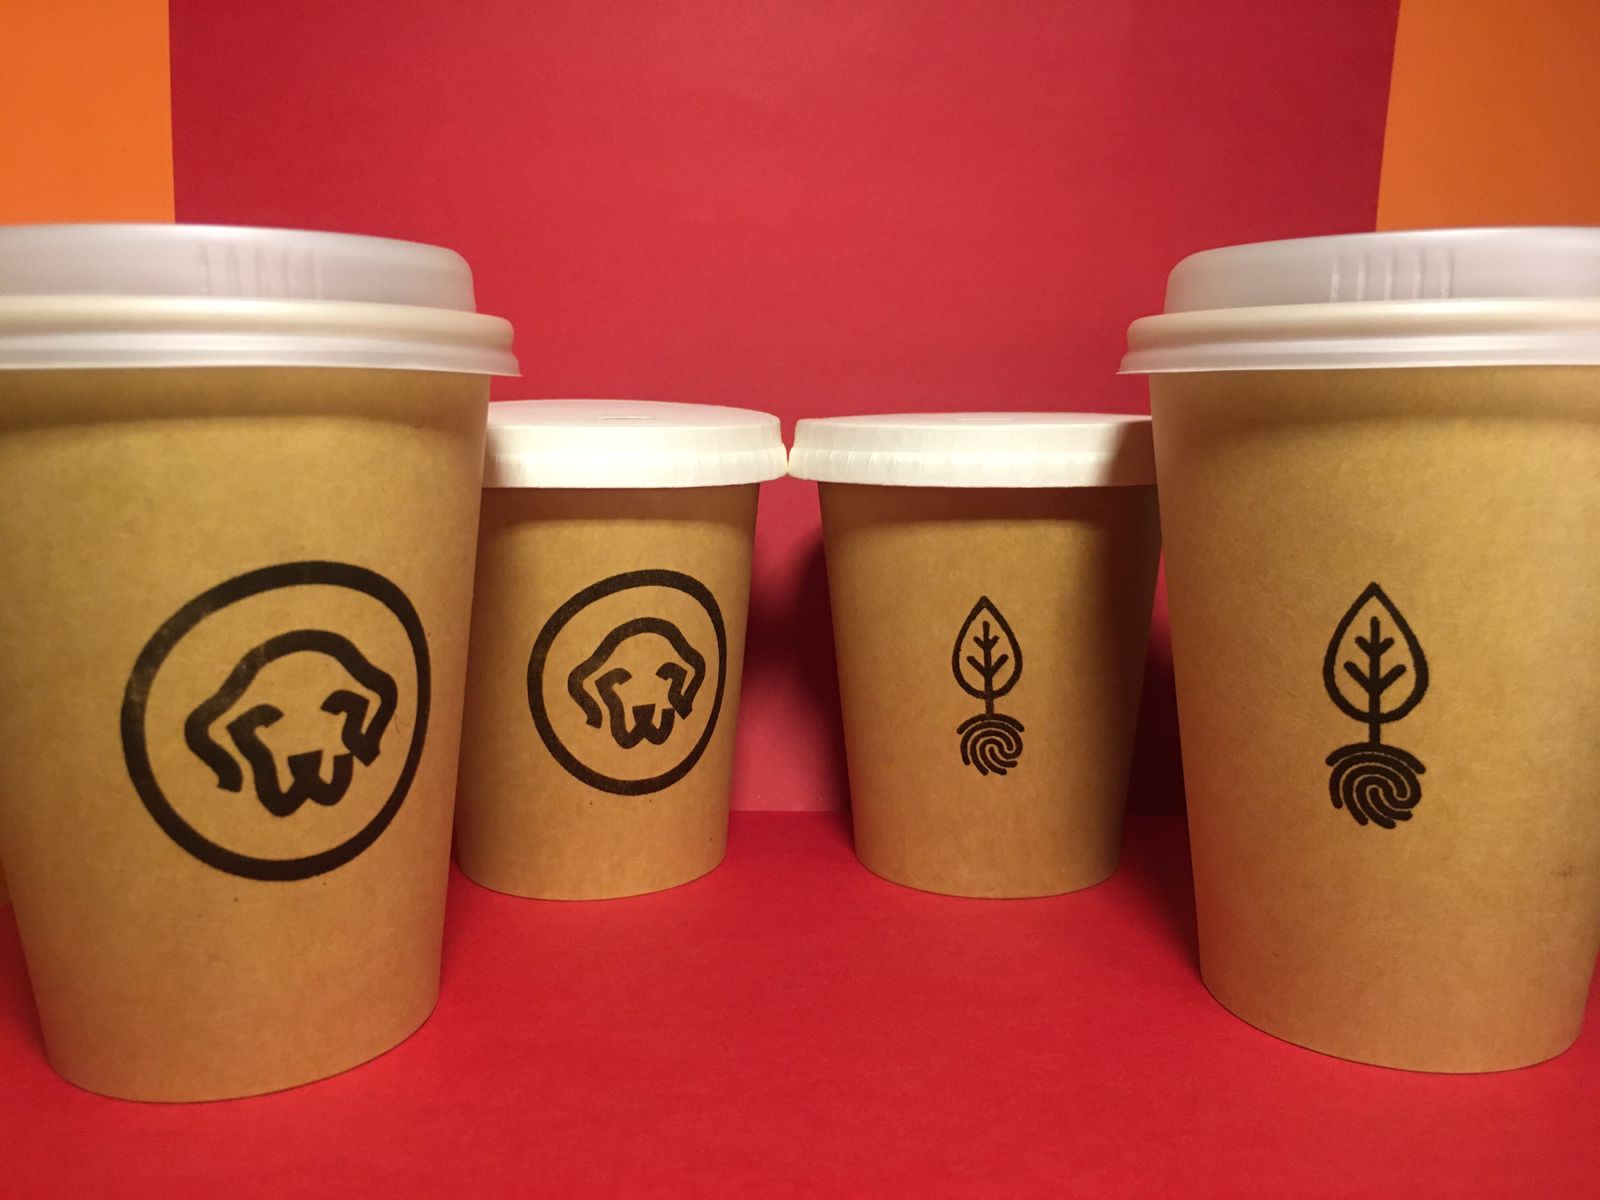 Paper Cups - Without plastic lining